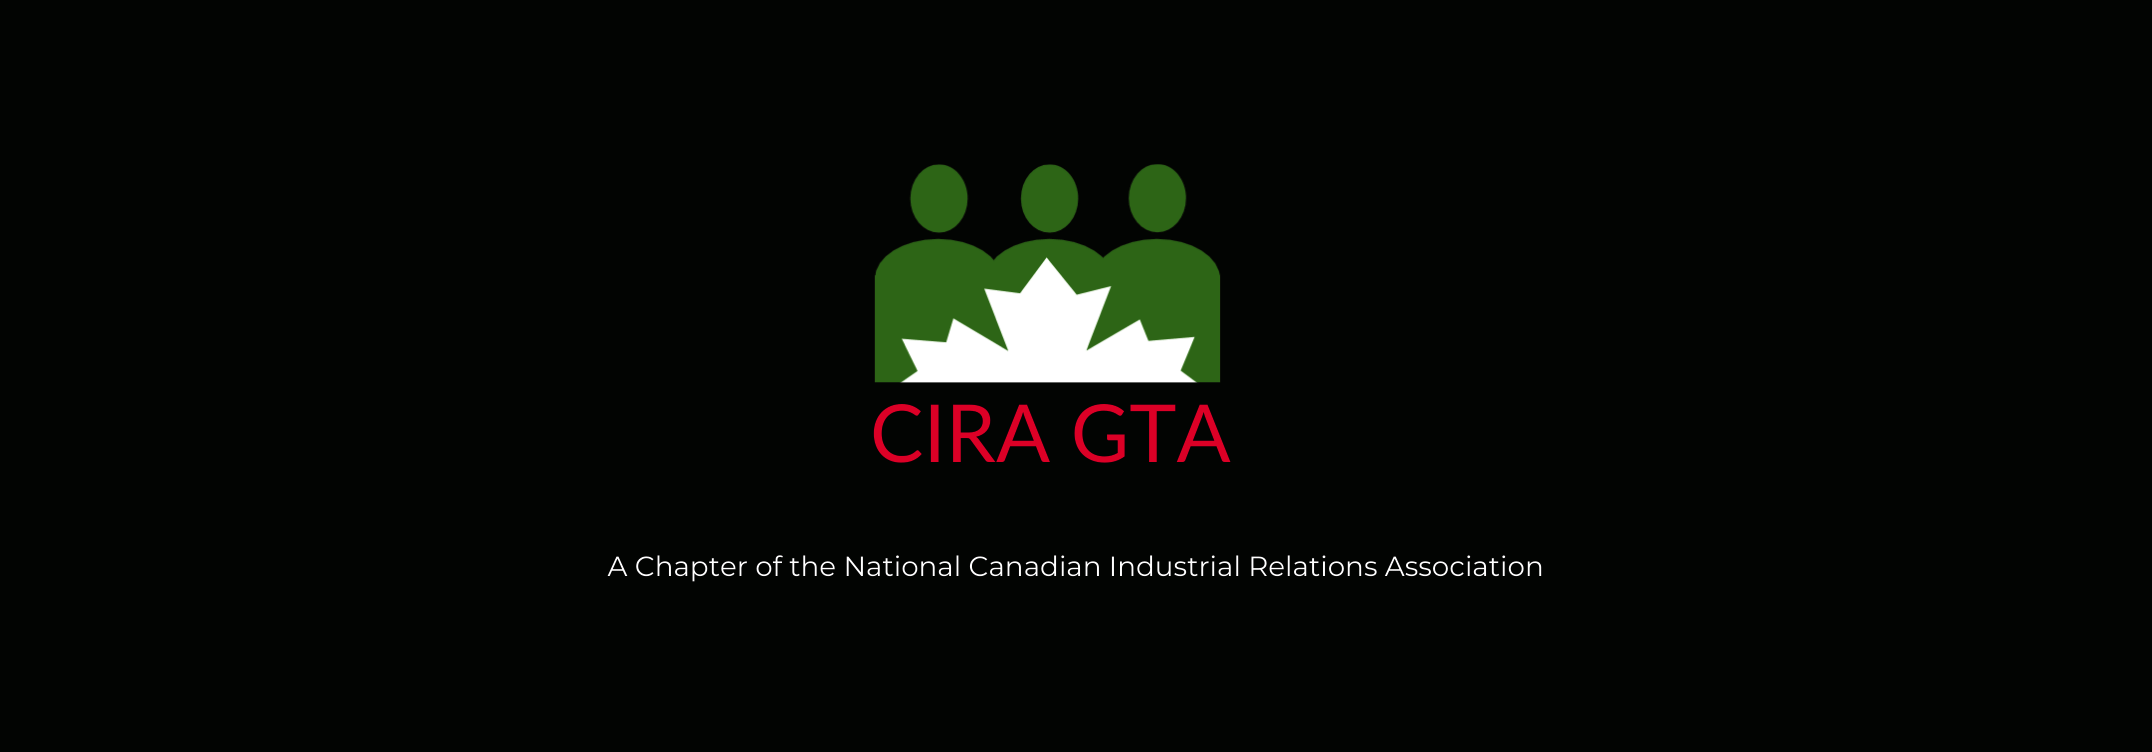 A Chapter of the National Canadian Industrial Relations Association 